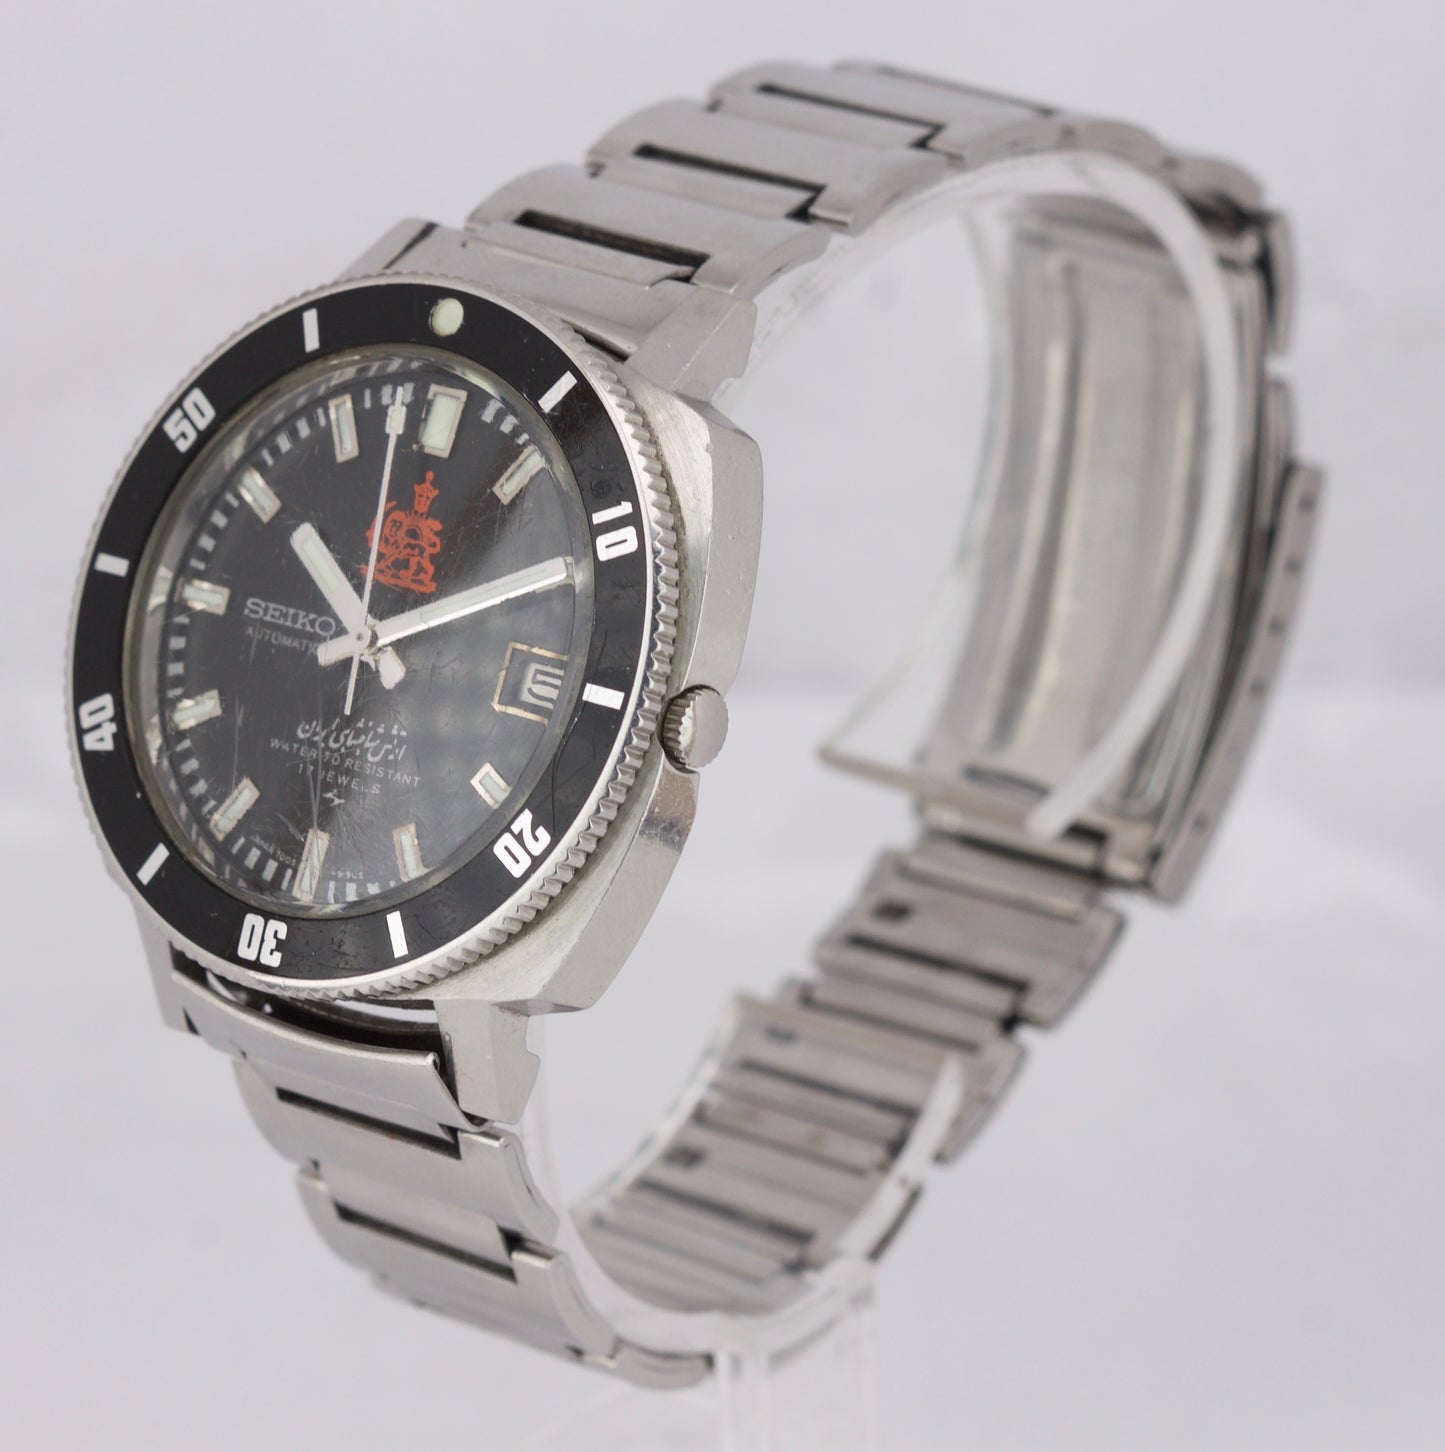 RARE Seiko Iranian Royal Army Diver Stainless Steel Black Date Watch 7005-8140